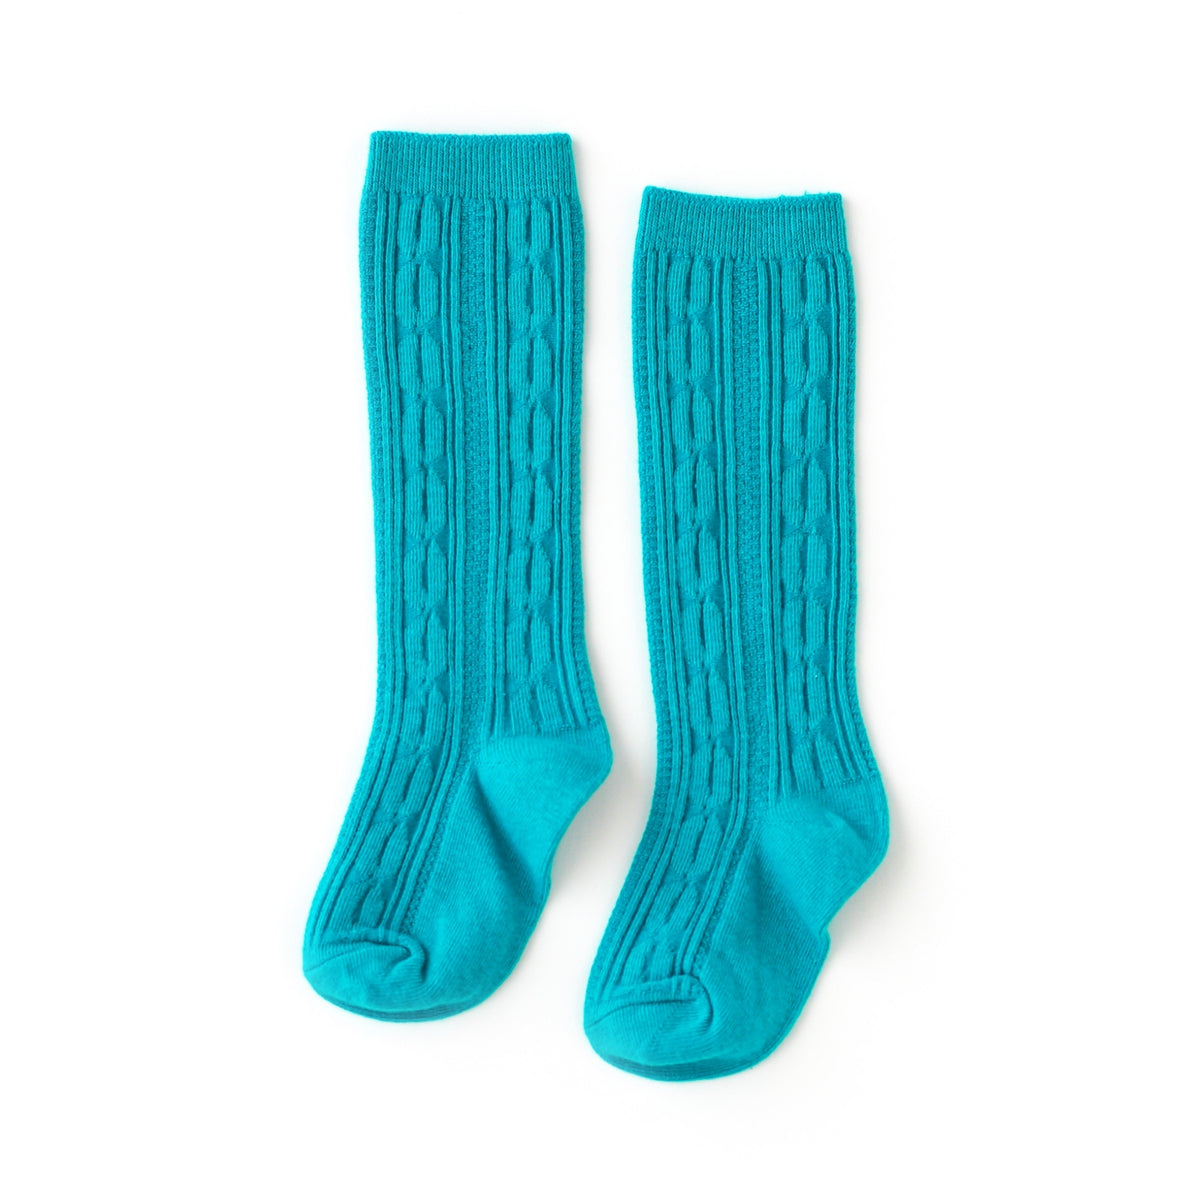 Peacock Cable Knit Knee High Socks